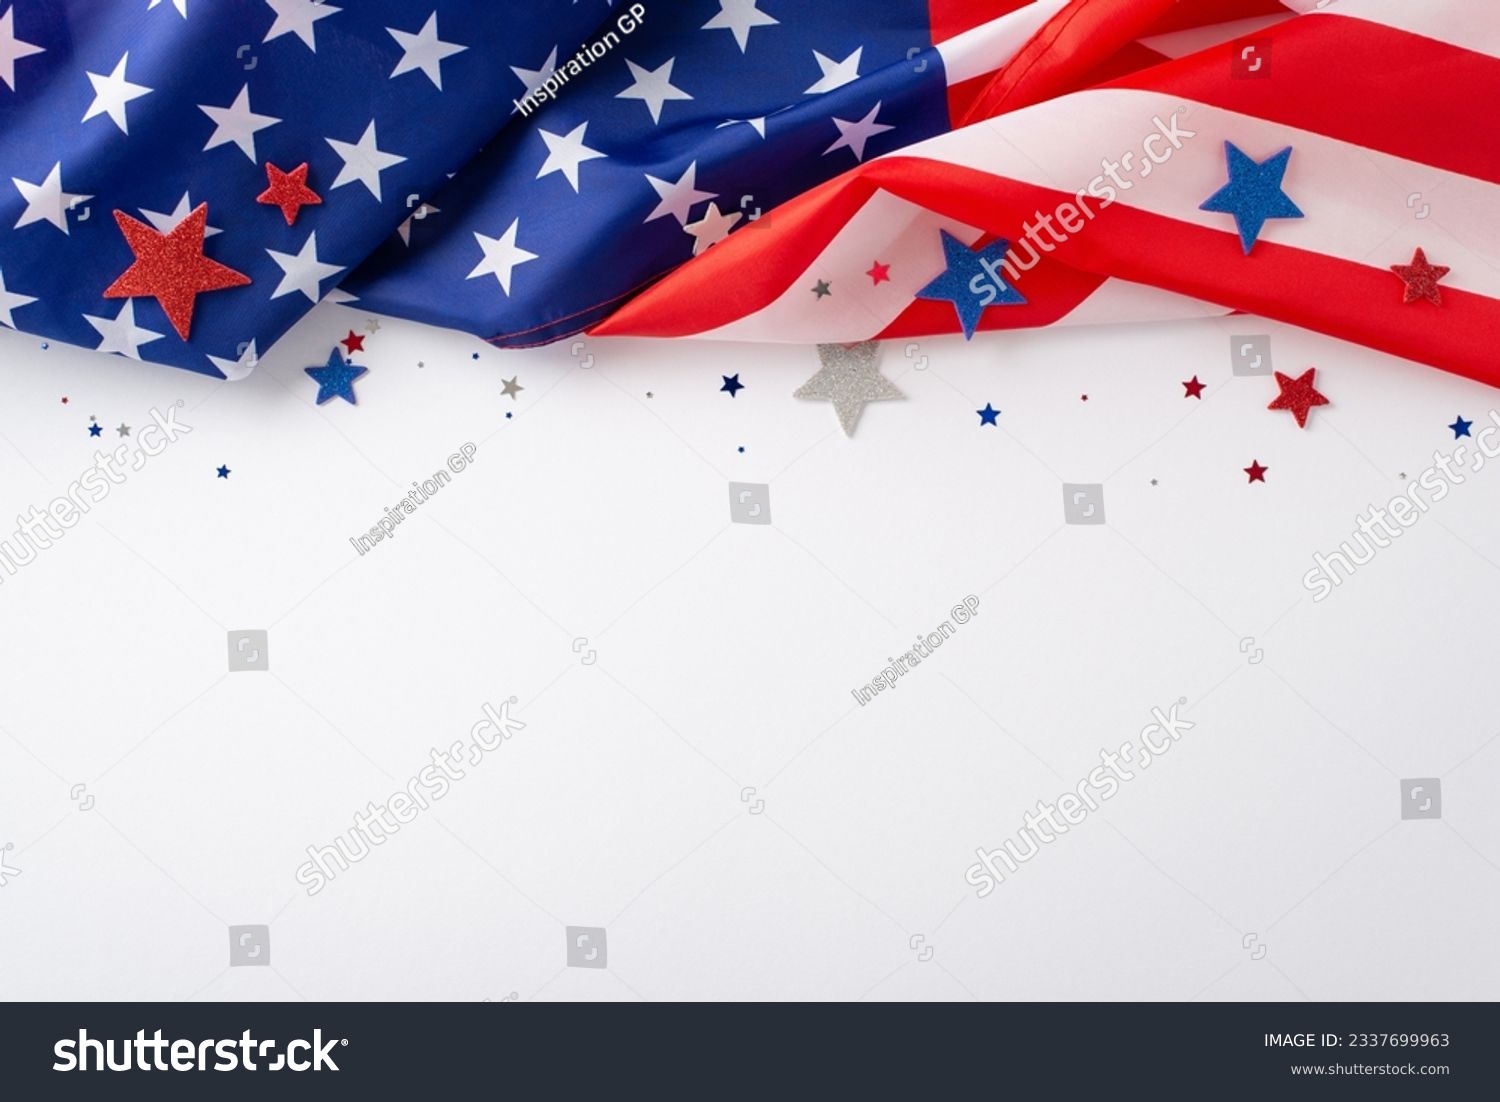 Festive mood of the public holiday: An evocative overhead composition displaying the American flag confetti stars on white backdrop. Ideal for advertisements or text placement during the occasion #2337699963